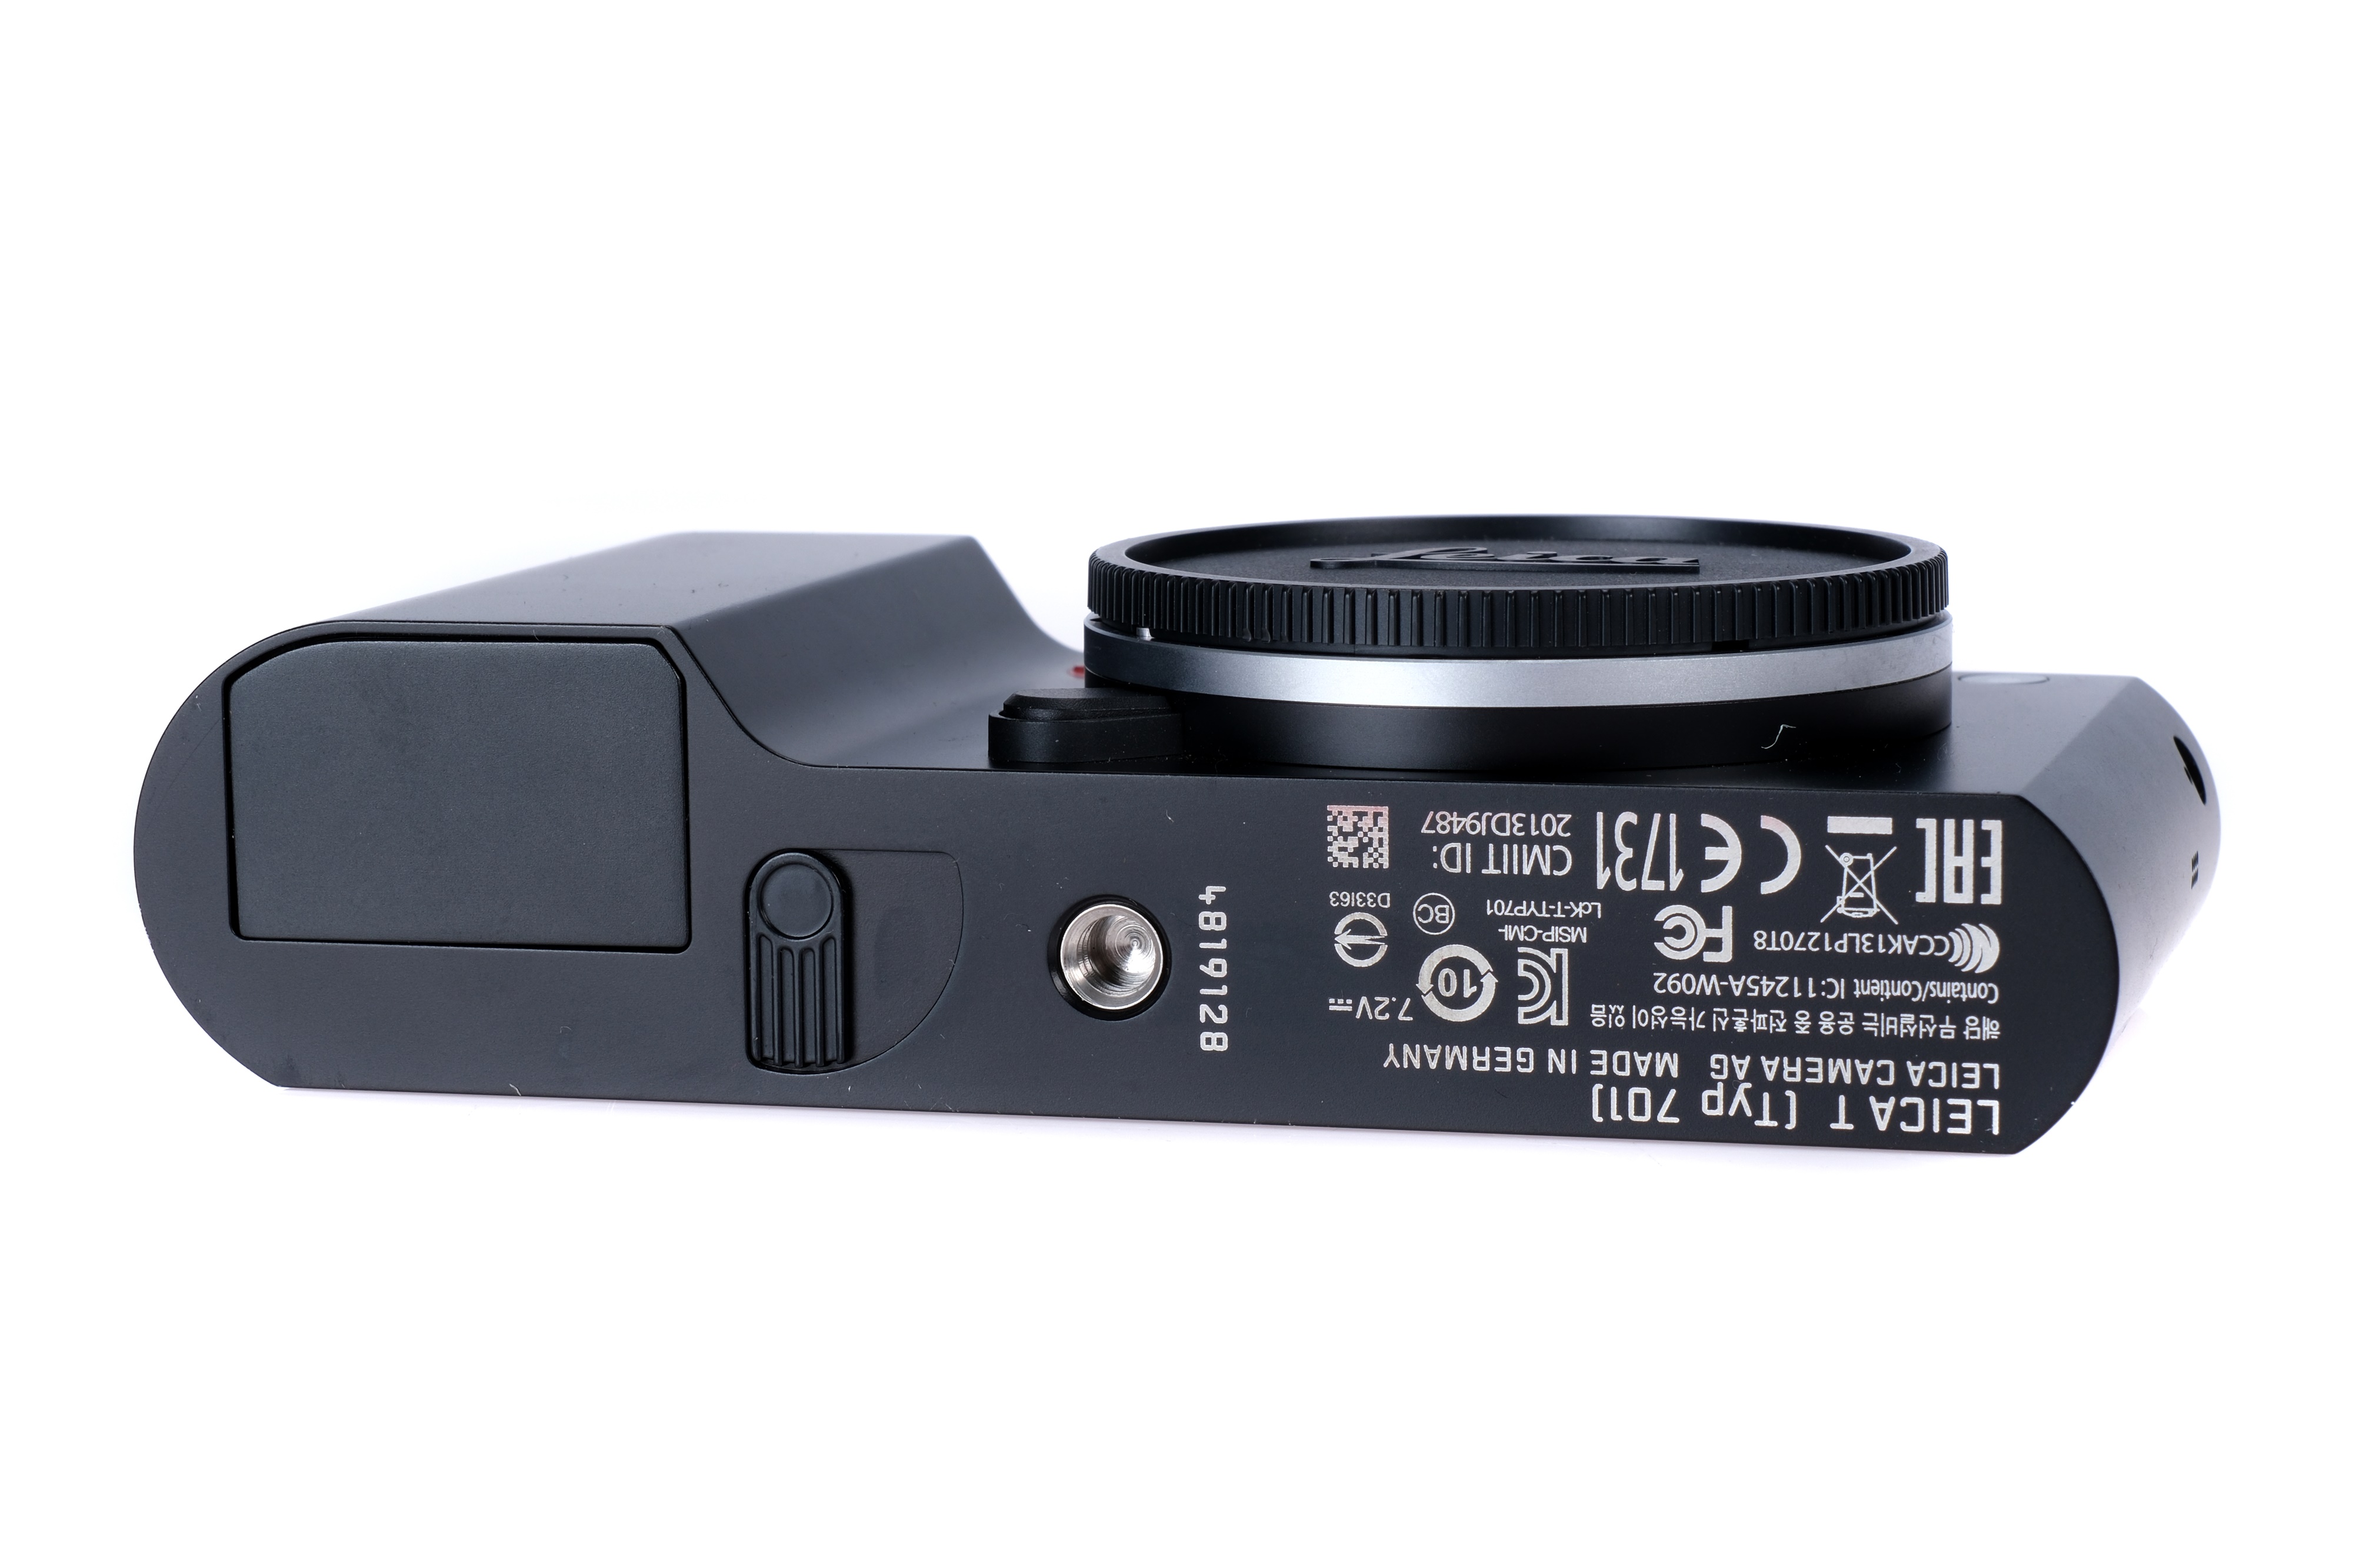 A Leica T Type 701 Digital Camera Body, - Image 4 of 6